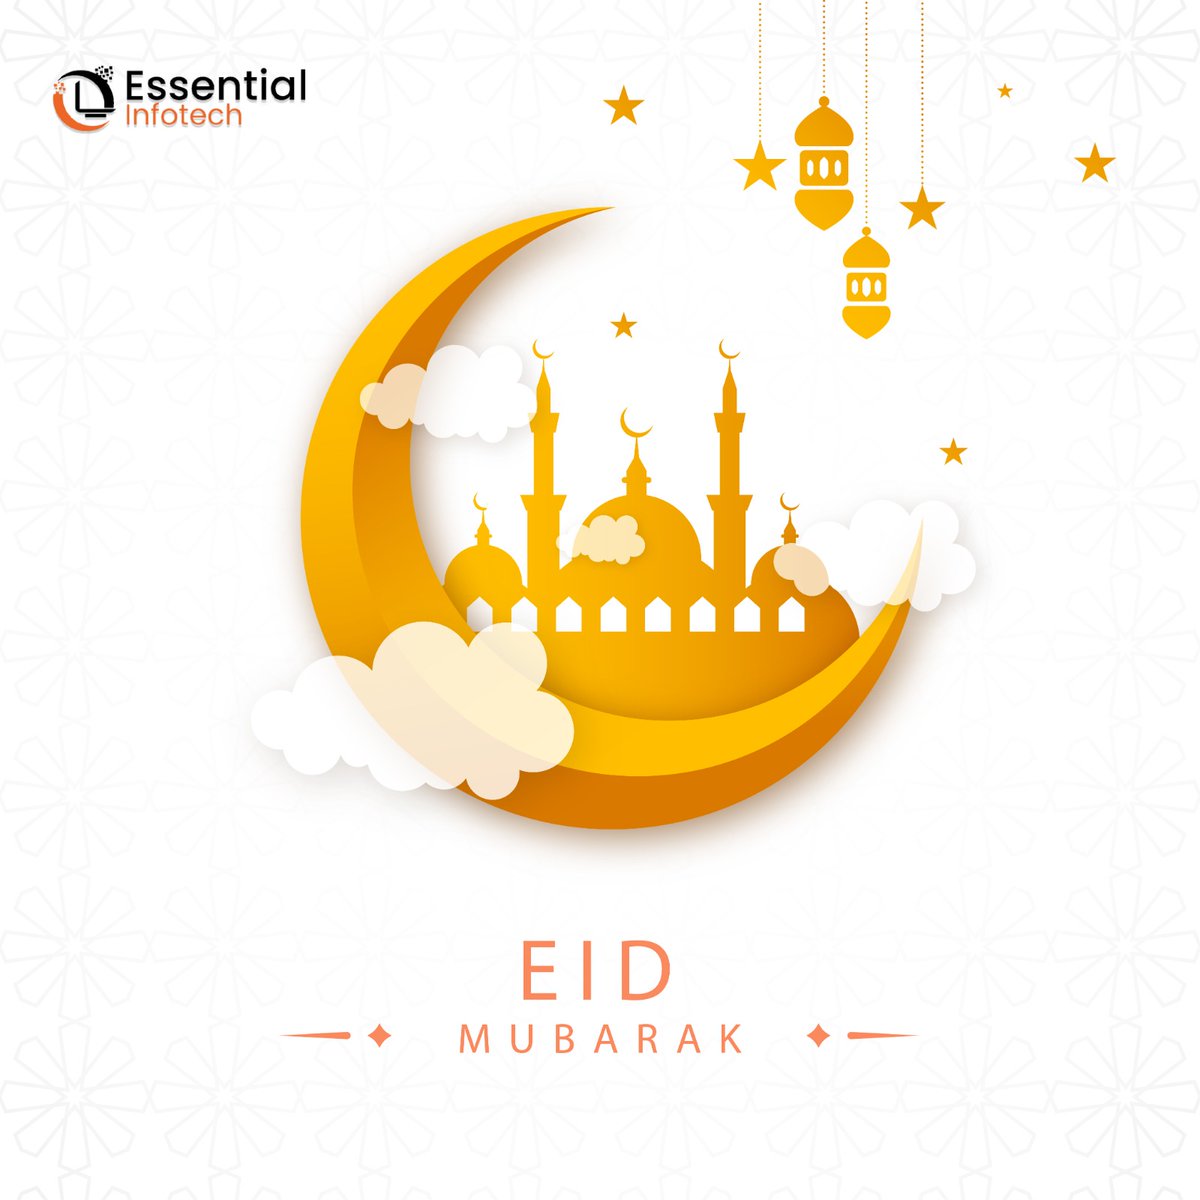 'Eid Mubarak to everyone! 🌙✨ May this blessed occasion fill your hearts with happiness, your homes with warmth, and your lives with endless blessings. Wishing you all a joyous Eid spent surrounded by loved ones, laughter, and delicious food!